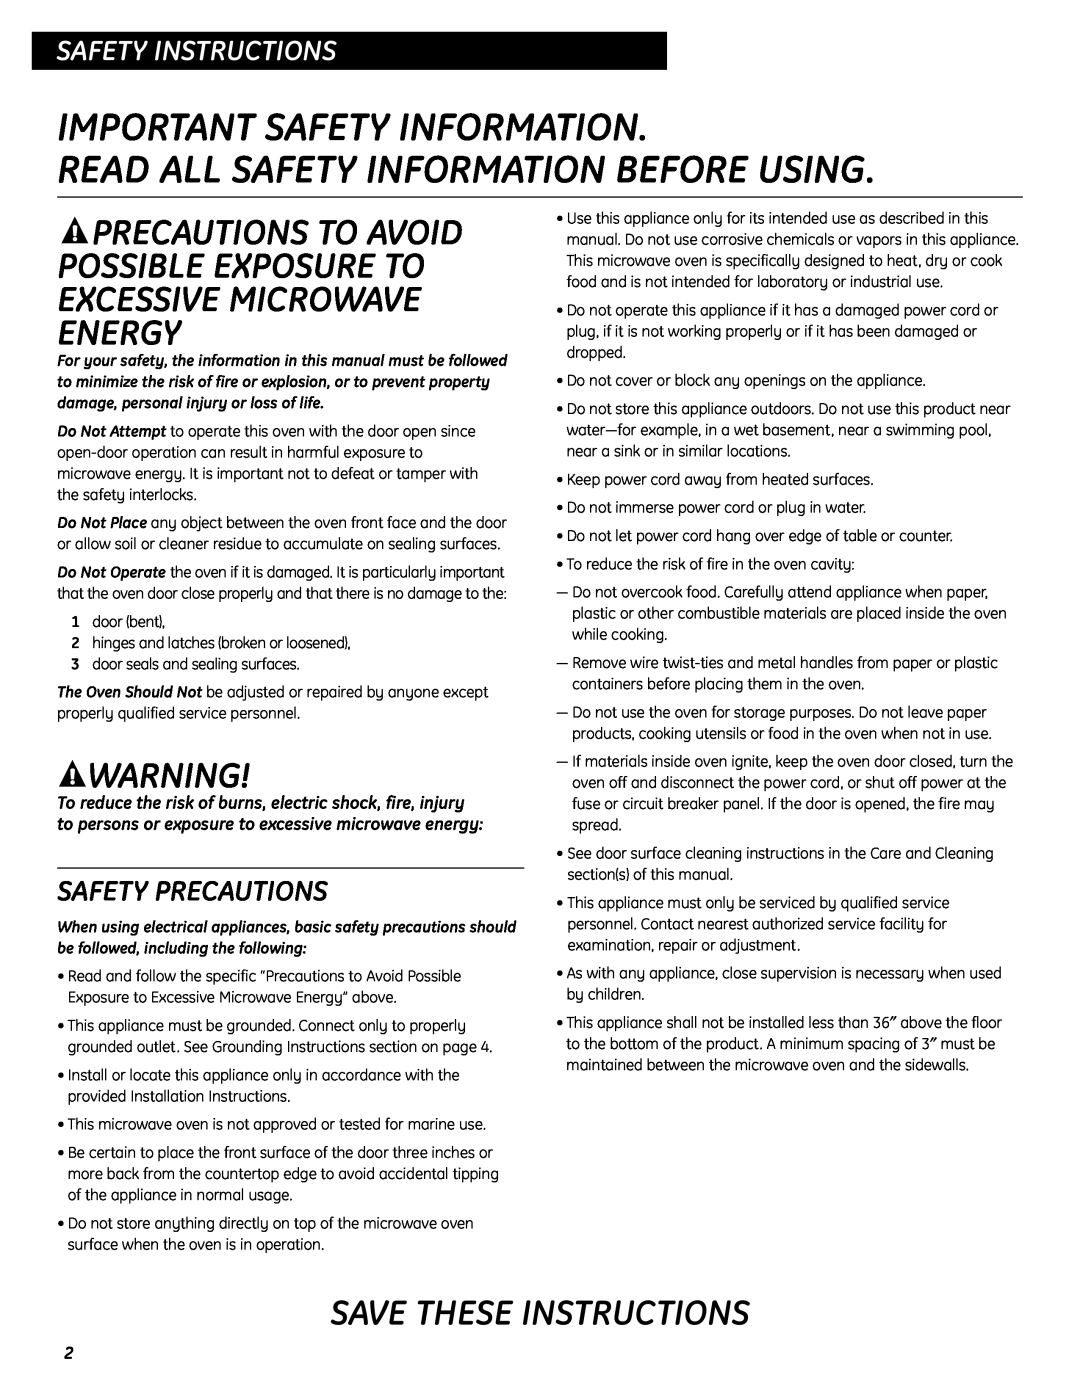 GE JES0737 quick start Important Safety Information, Read All Safety Information Before Using, Save These Instructions 